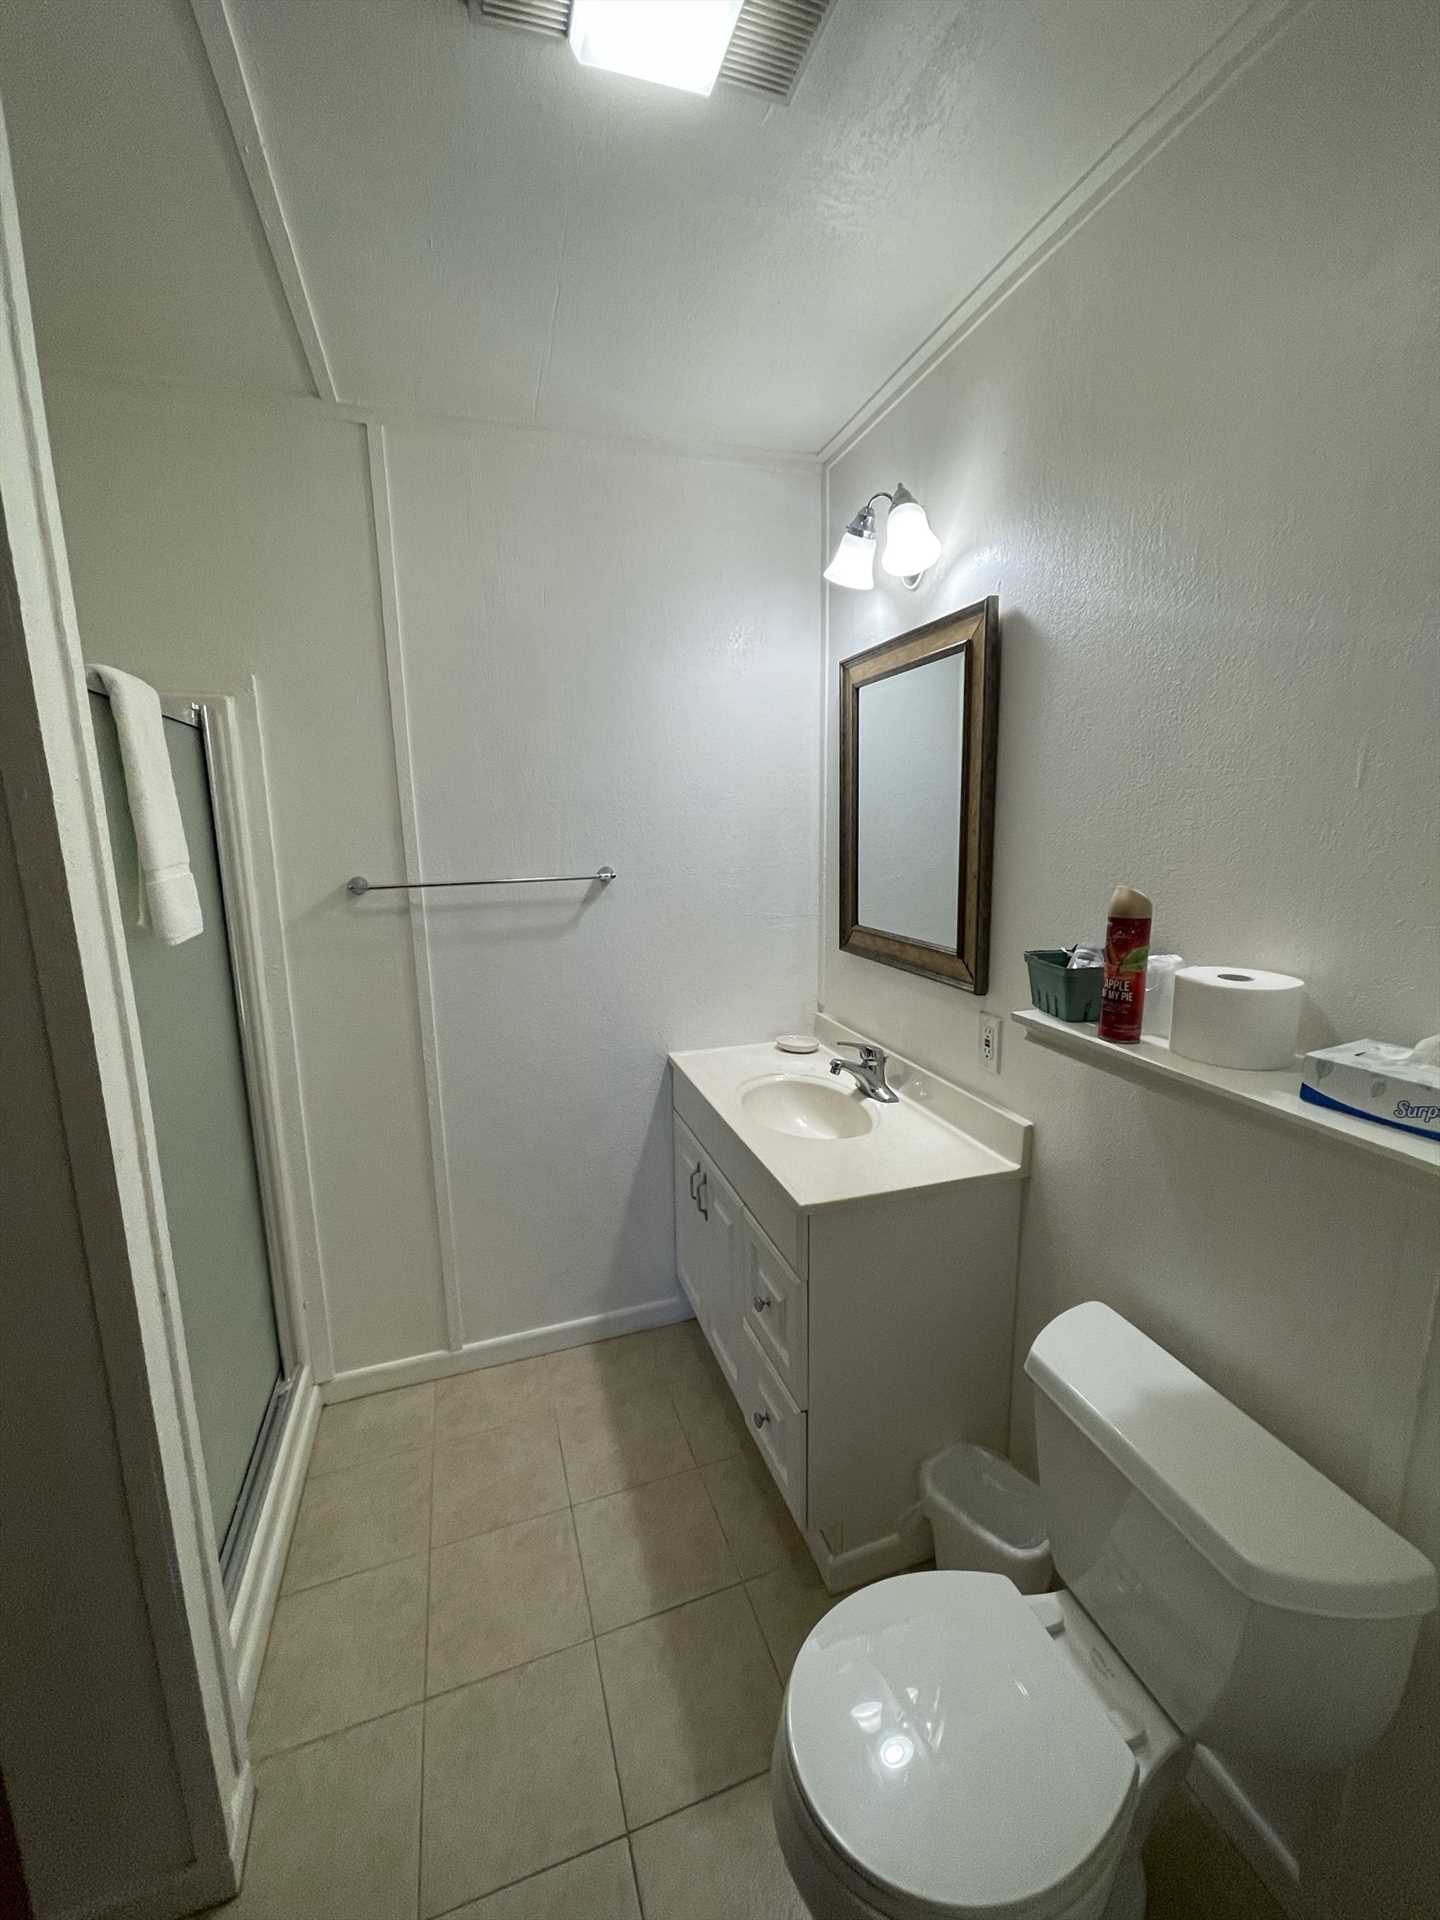                                                 Fresh linens are provided in the spotless full bath, which is equipped with a shower stall.